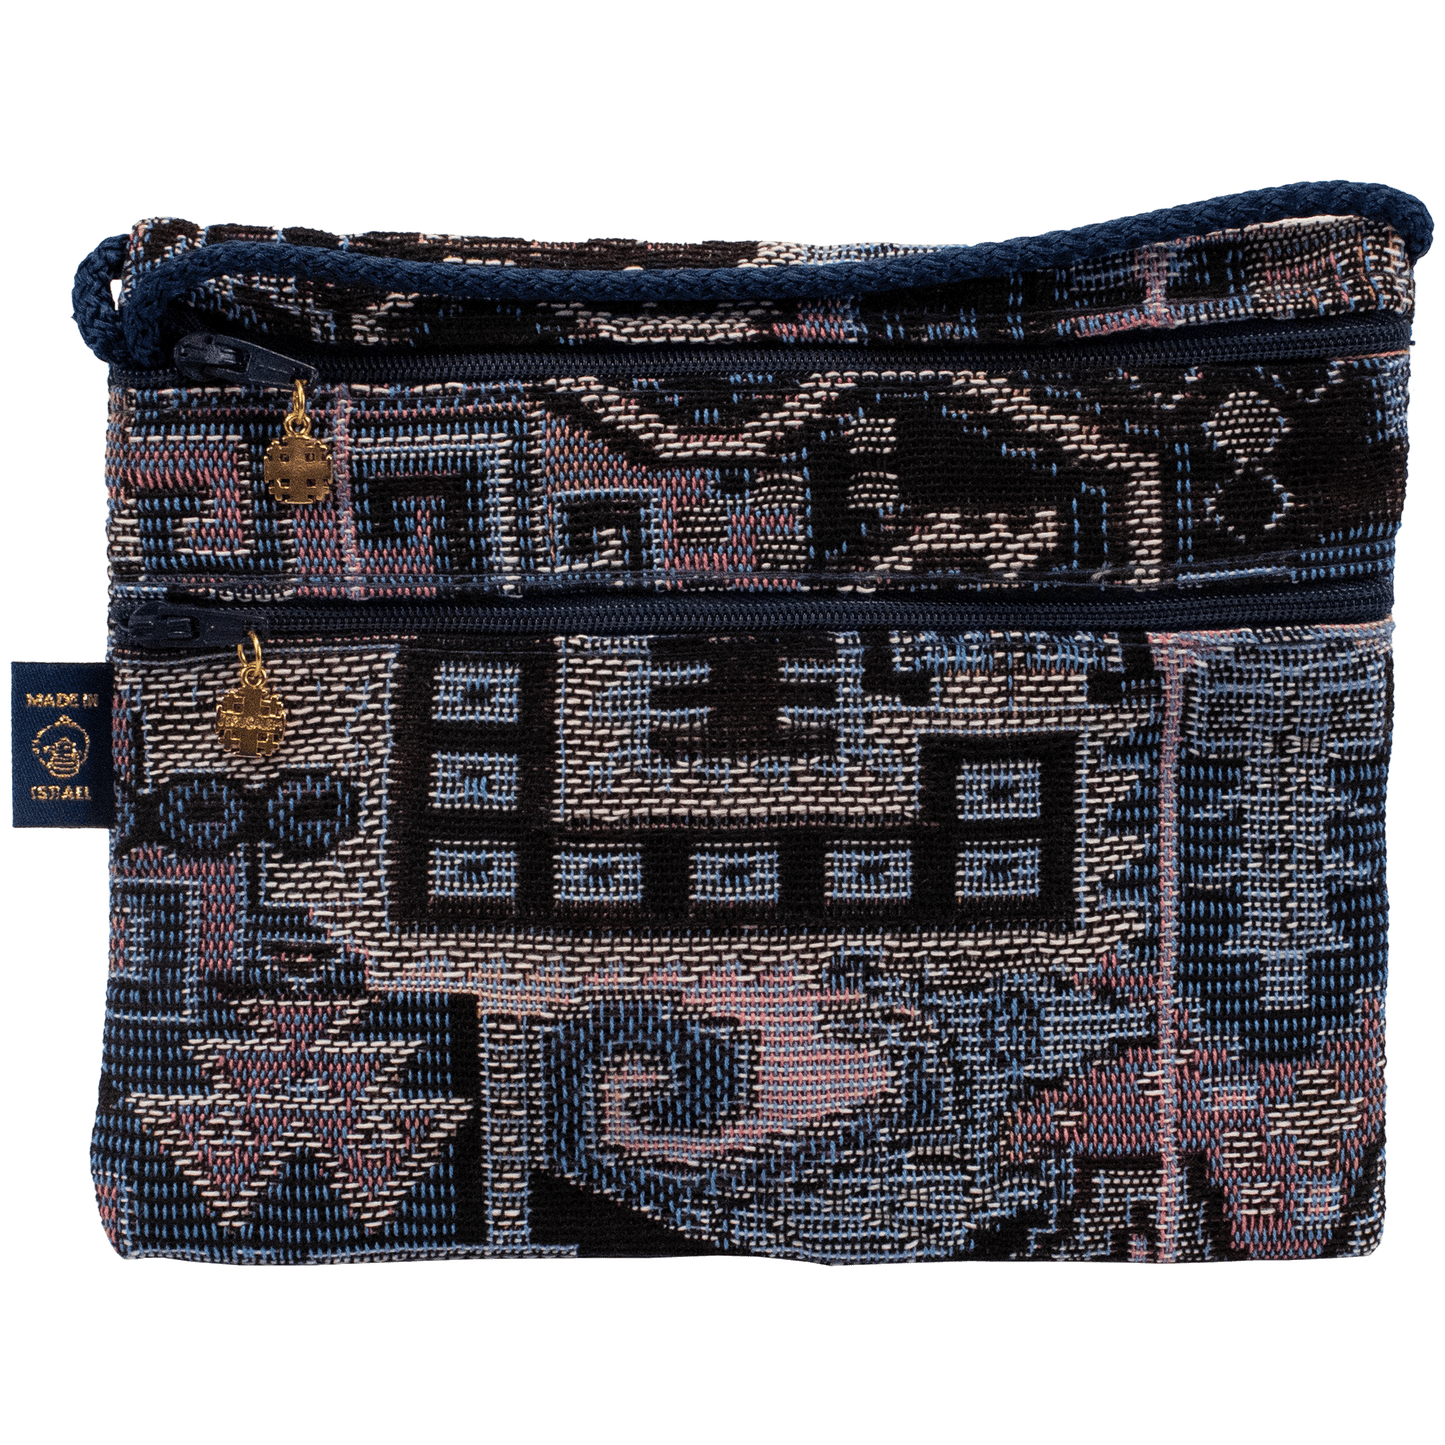 Double zipper horizontal crossbody bag with blue and lavender tones and Mosaic Tribal pattern